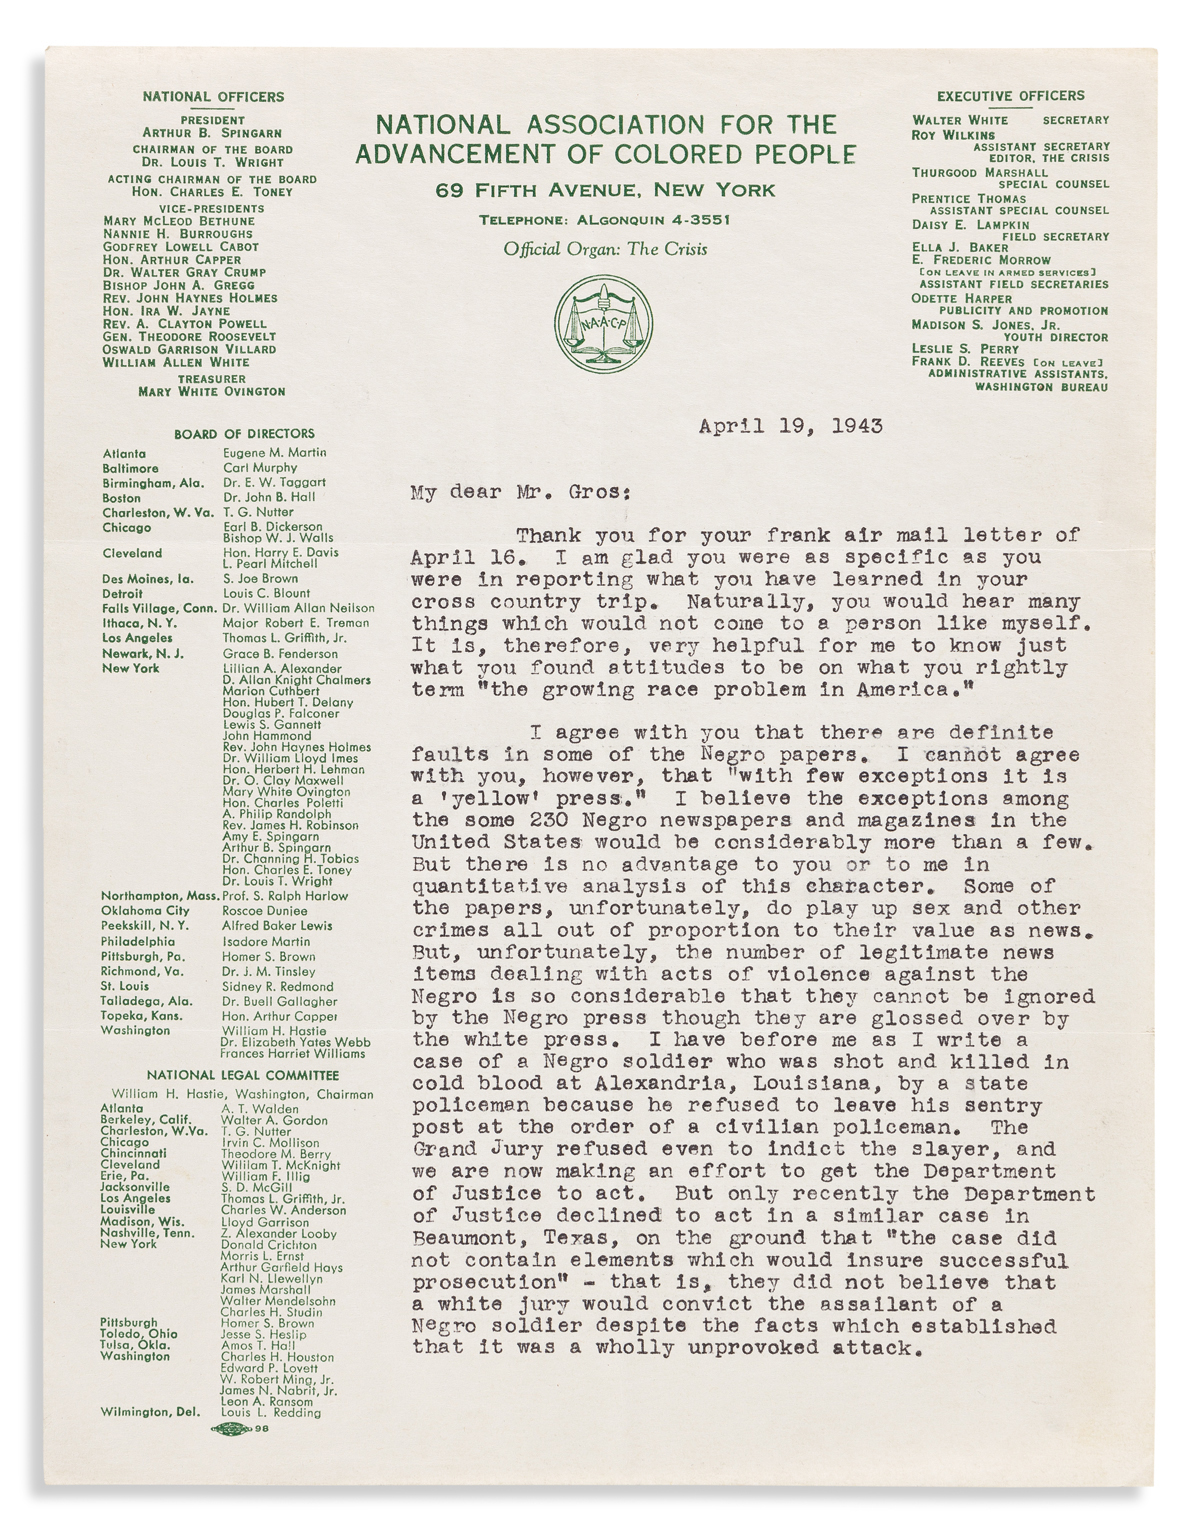 (CIVIL RIGHTS.) Correspondence between NAACP leader Walter White and a white journalist, debating the merits of the Negro press.